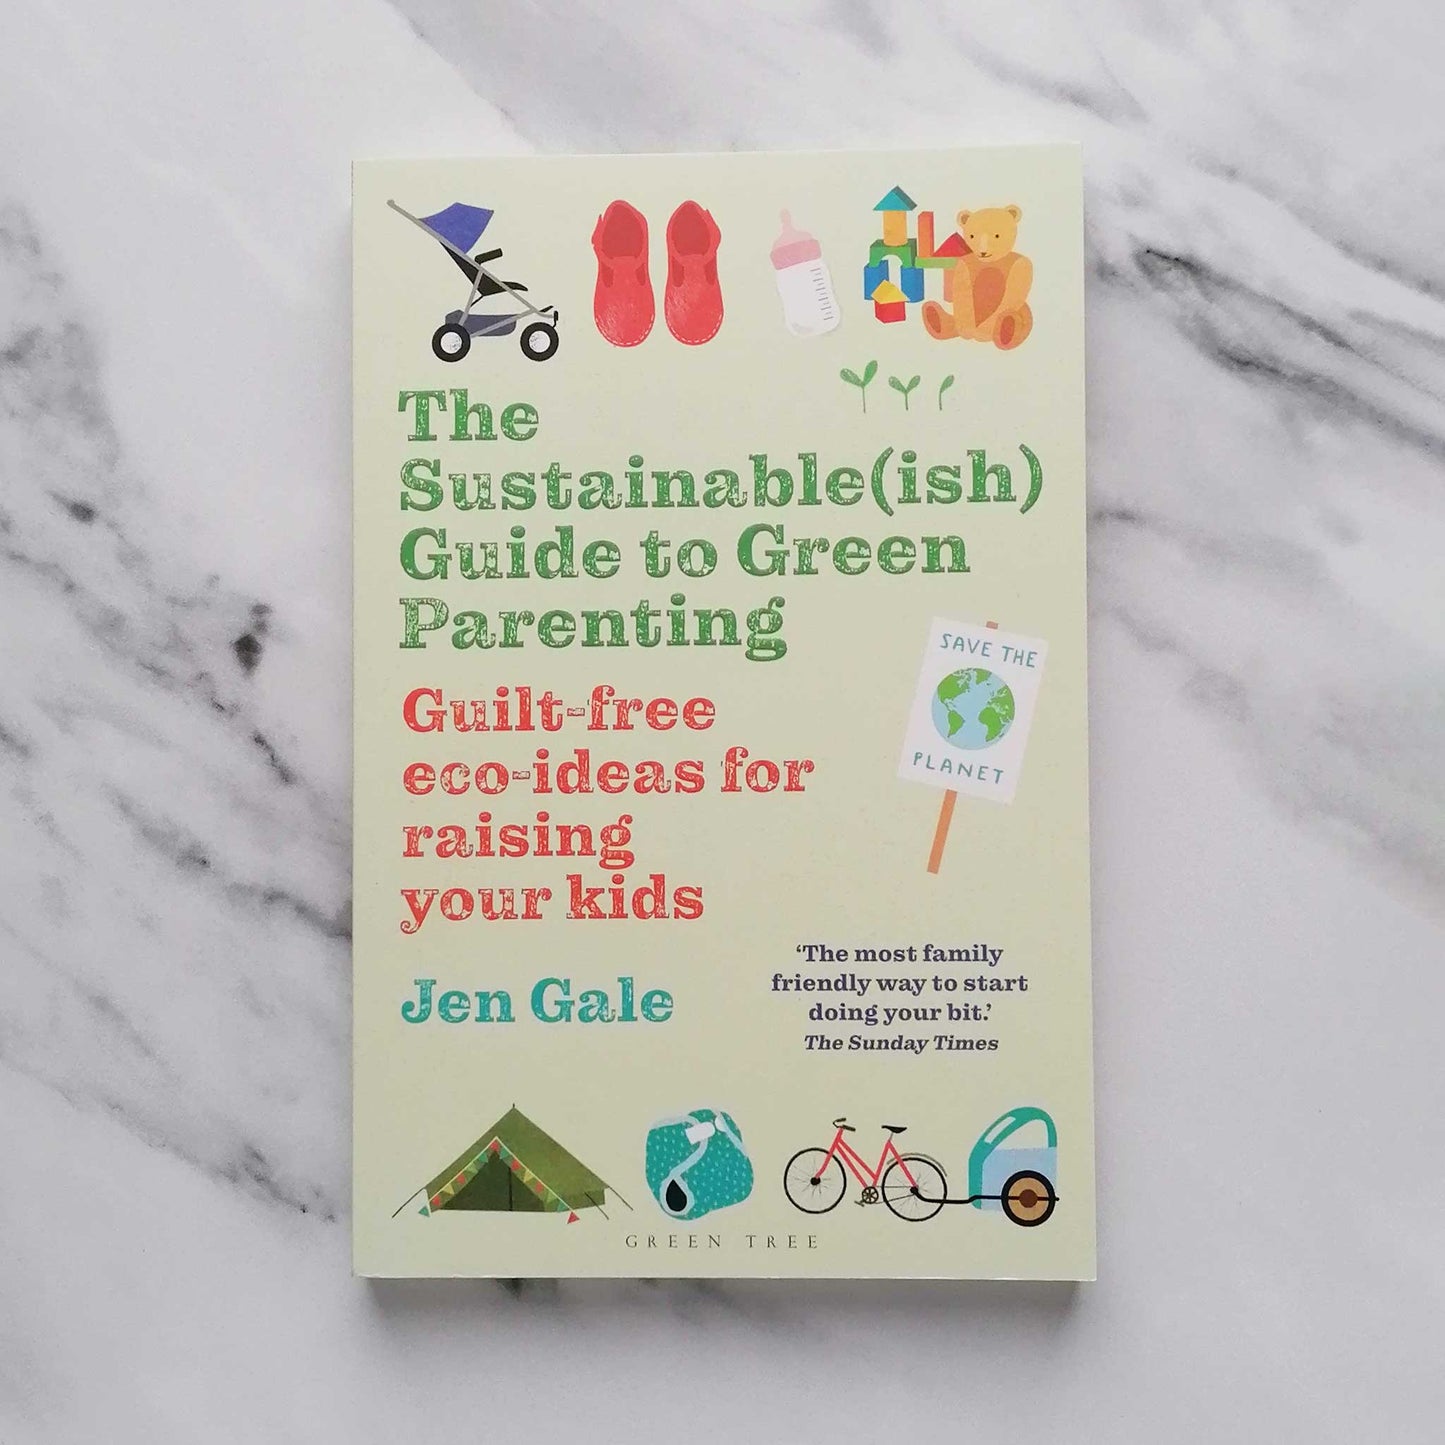 Our Bookshelf Print Books The Sustainable(ish) Guide to Green Parenting: Guilt-free eco-ideas for raising your kids